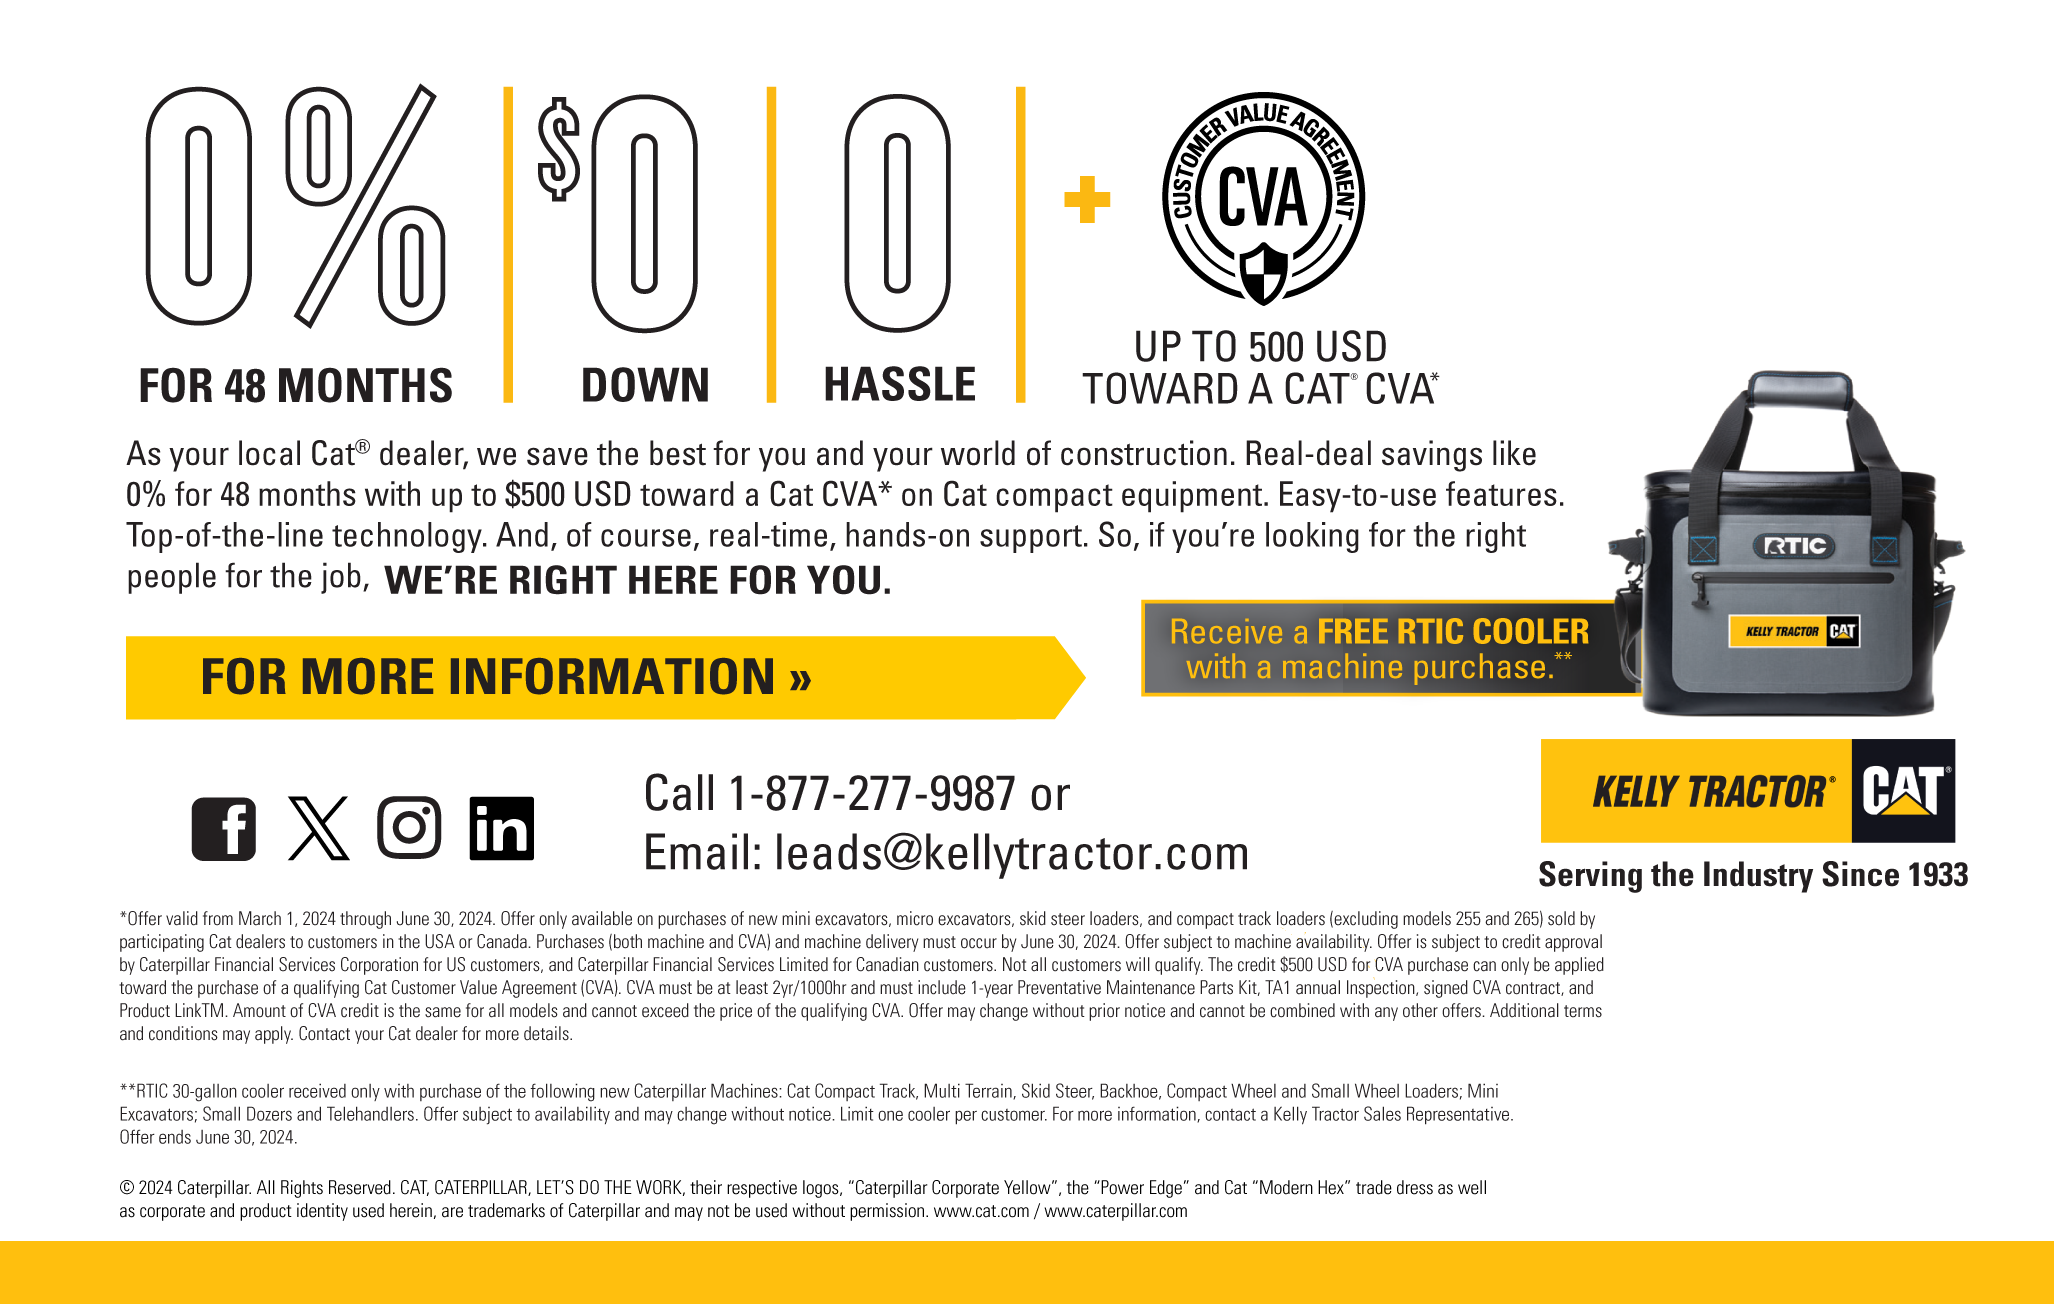 Affordable Caterpillar Promotion Main Content at Kelly Tractor Co.